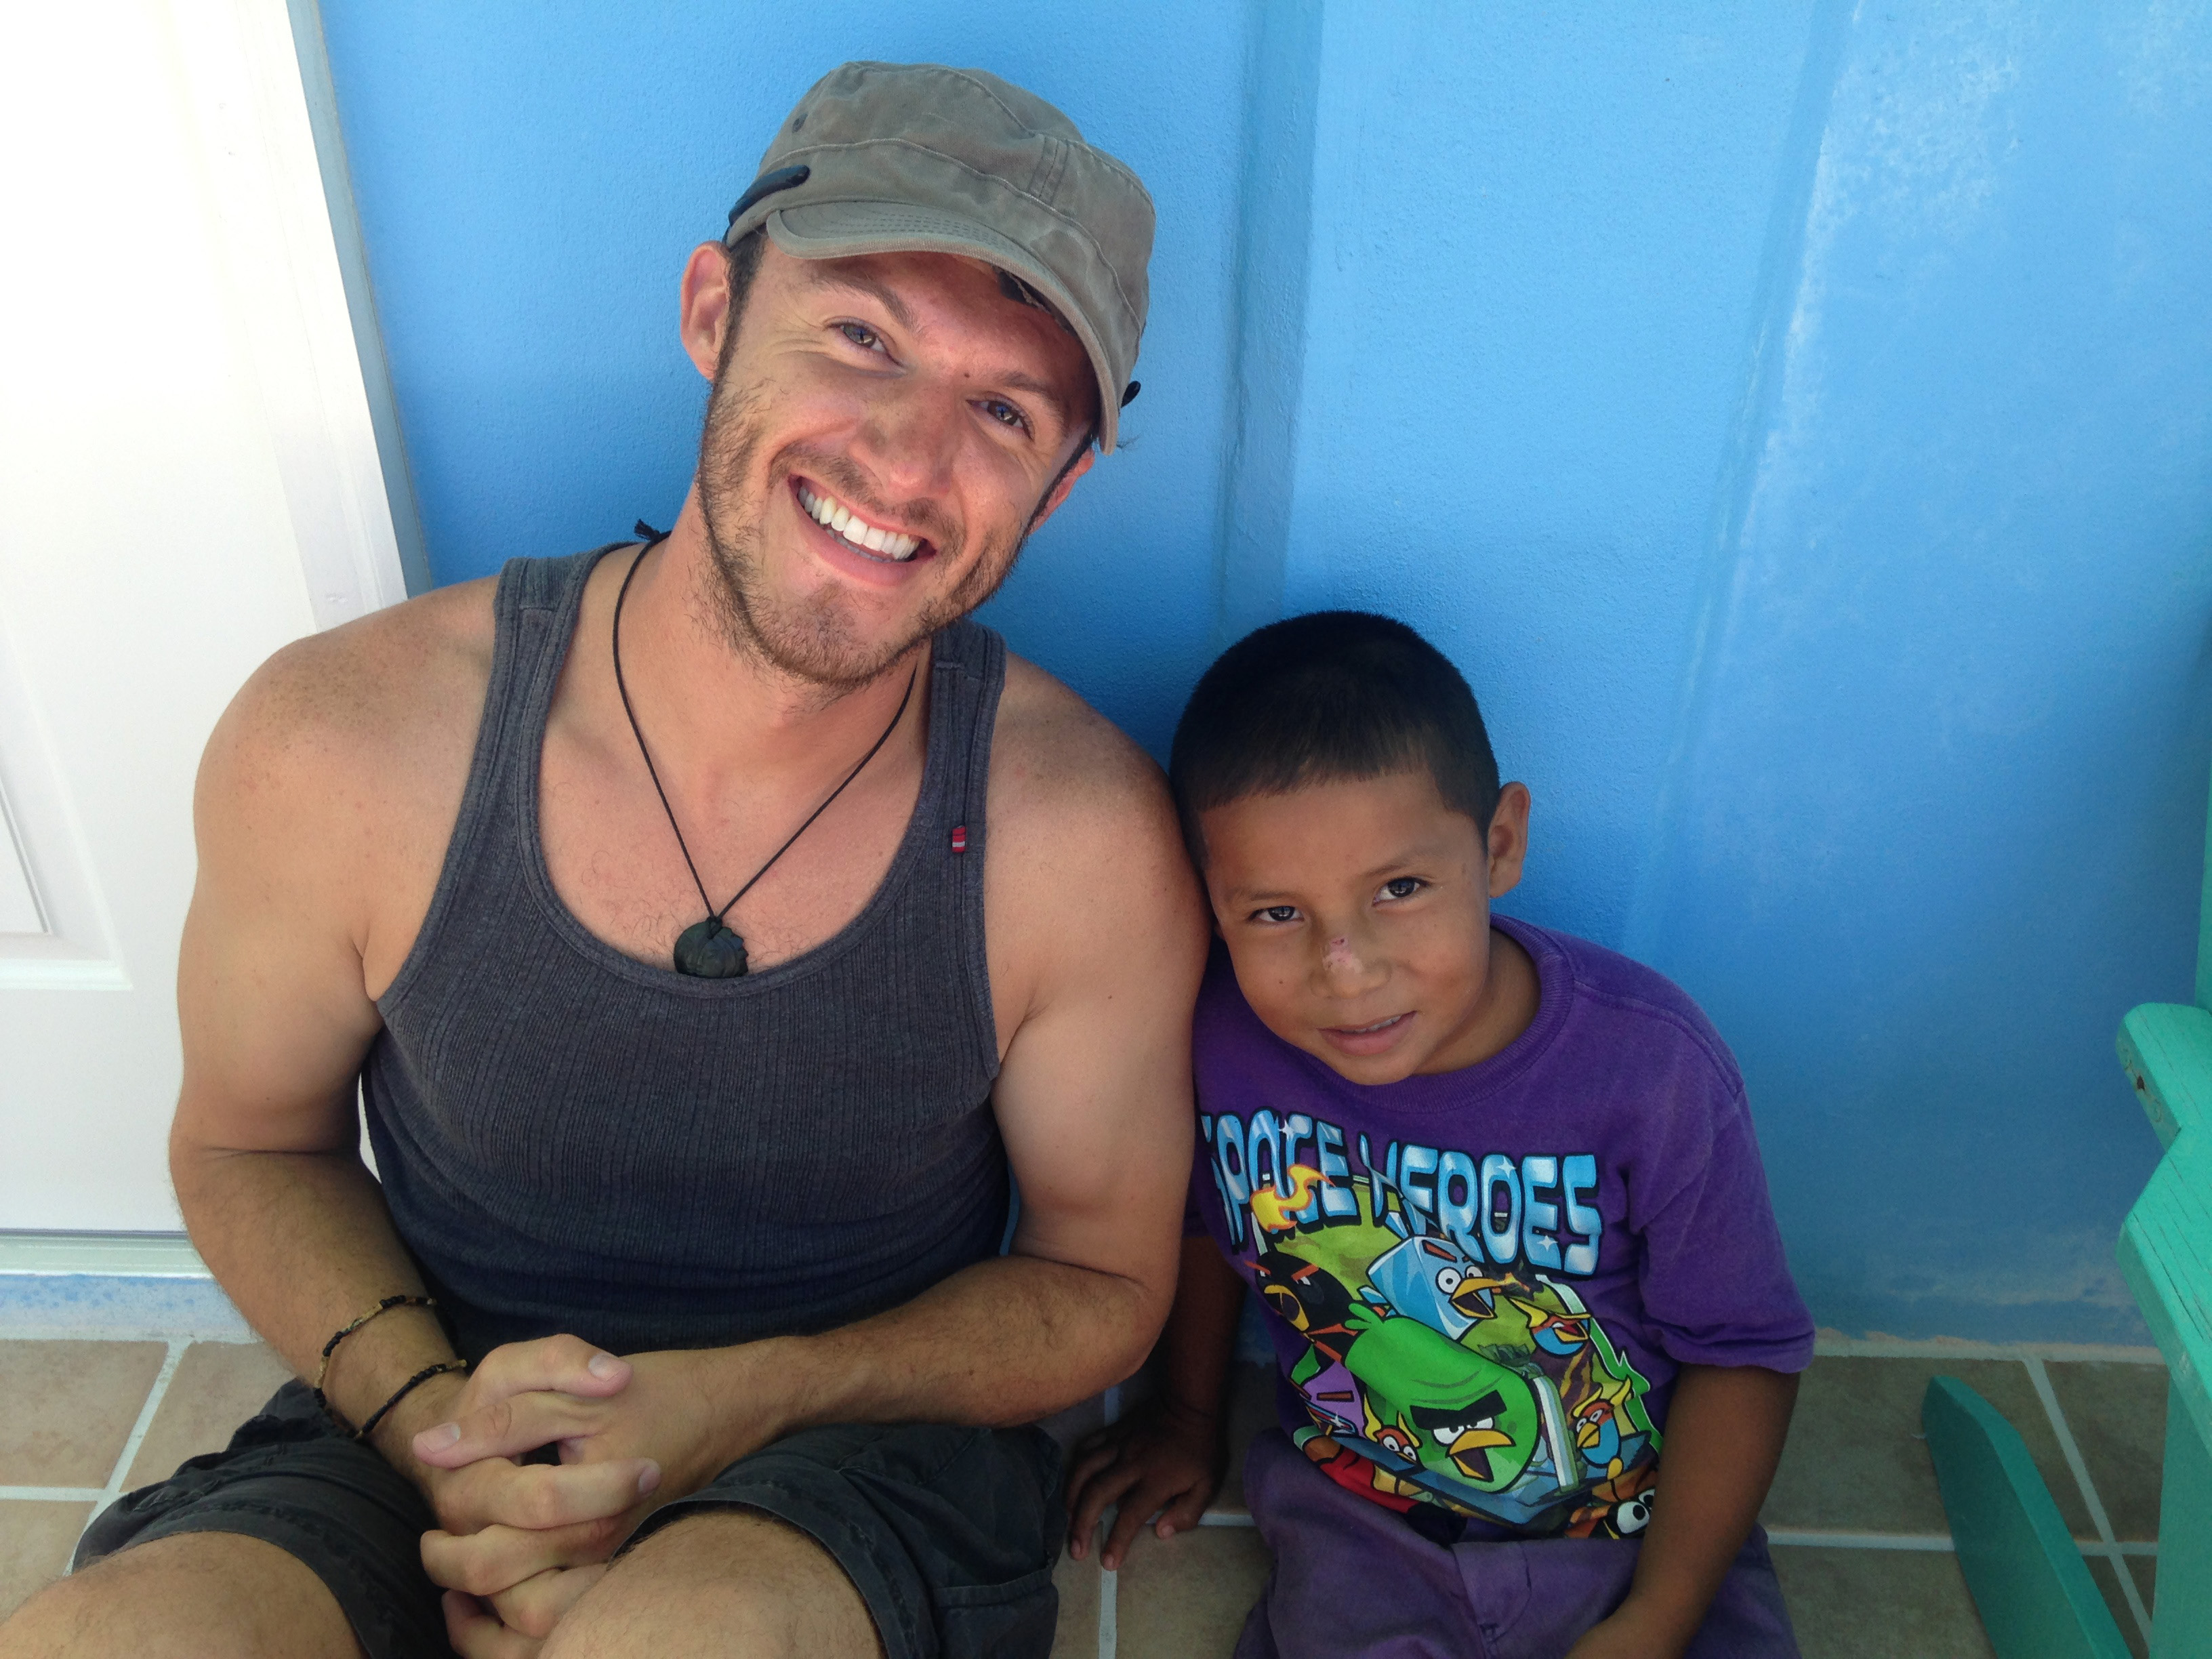 Myself and a new friend in Caye Caulker, Belize.